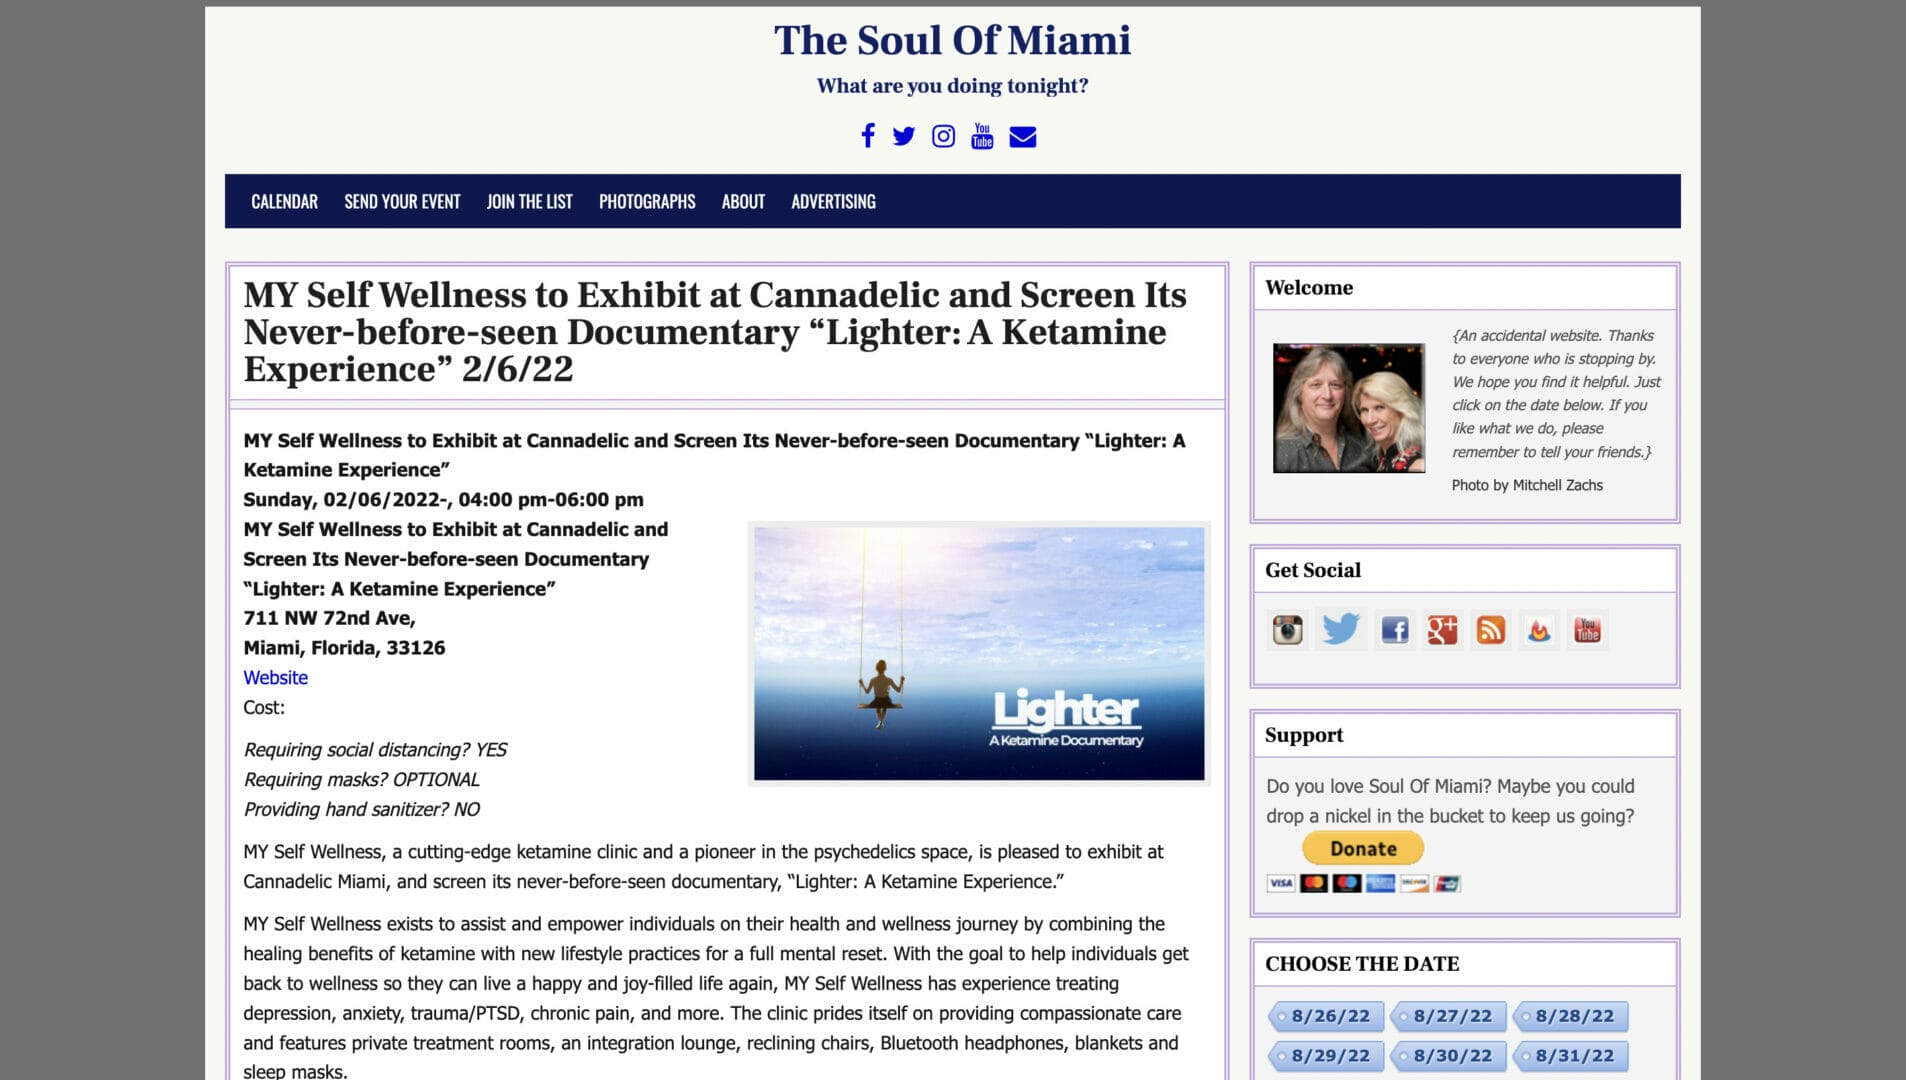 MY Self Wellness to Exhibit at Cannadelic and Screen Its Never-before-seen Documentary “Lighter: A Ketamine Experience” 2/6/22